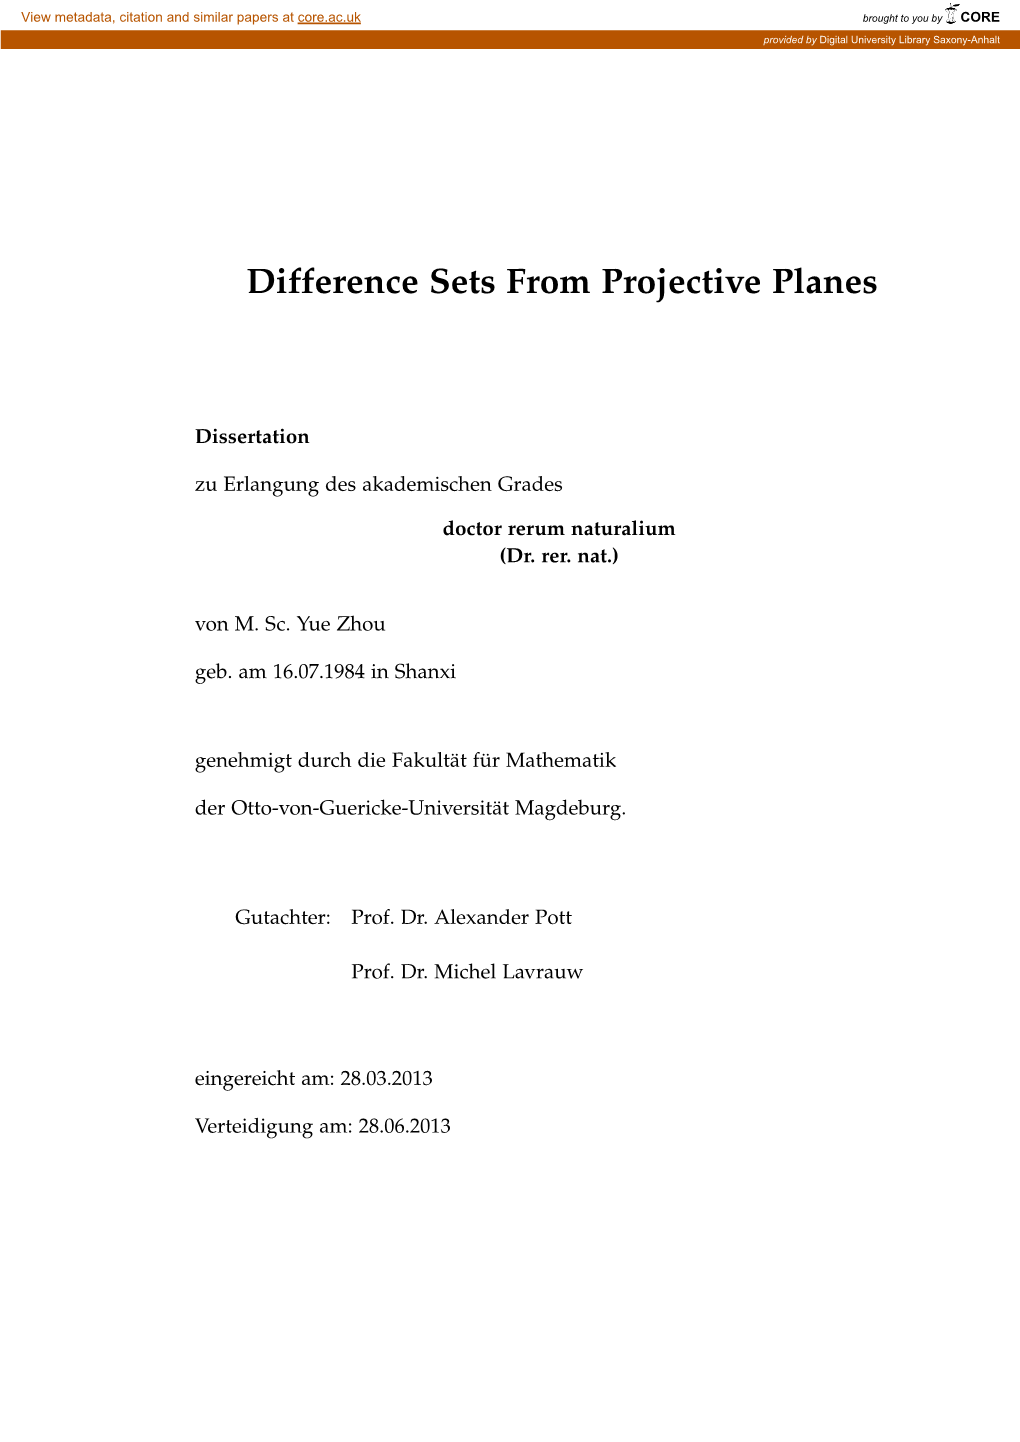 Difference Sets from Projective Planes